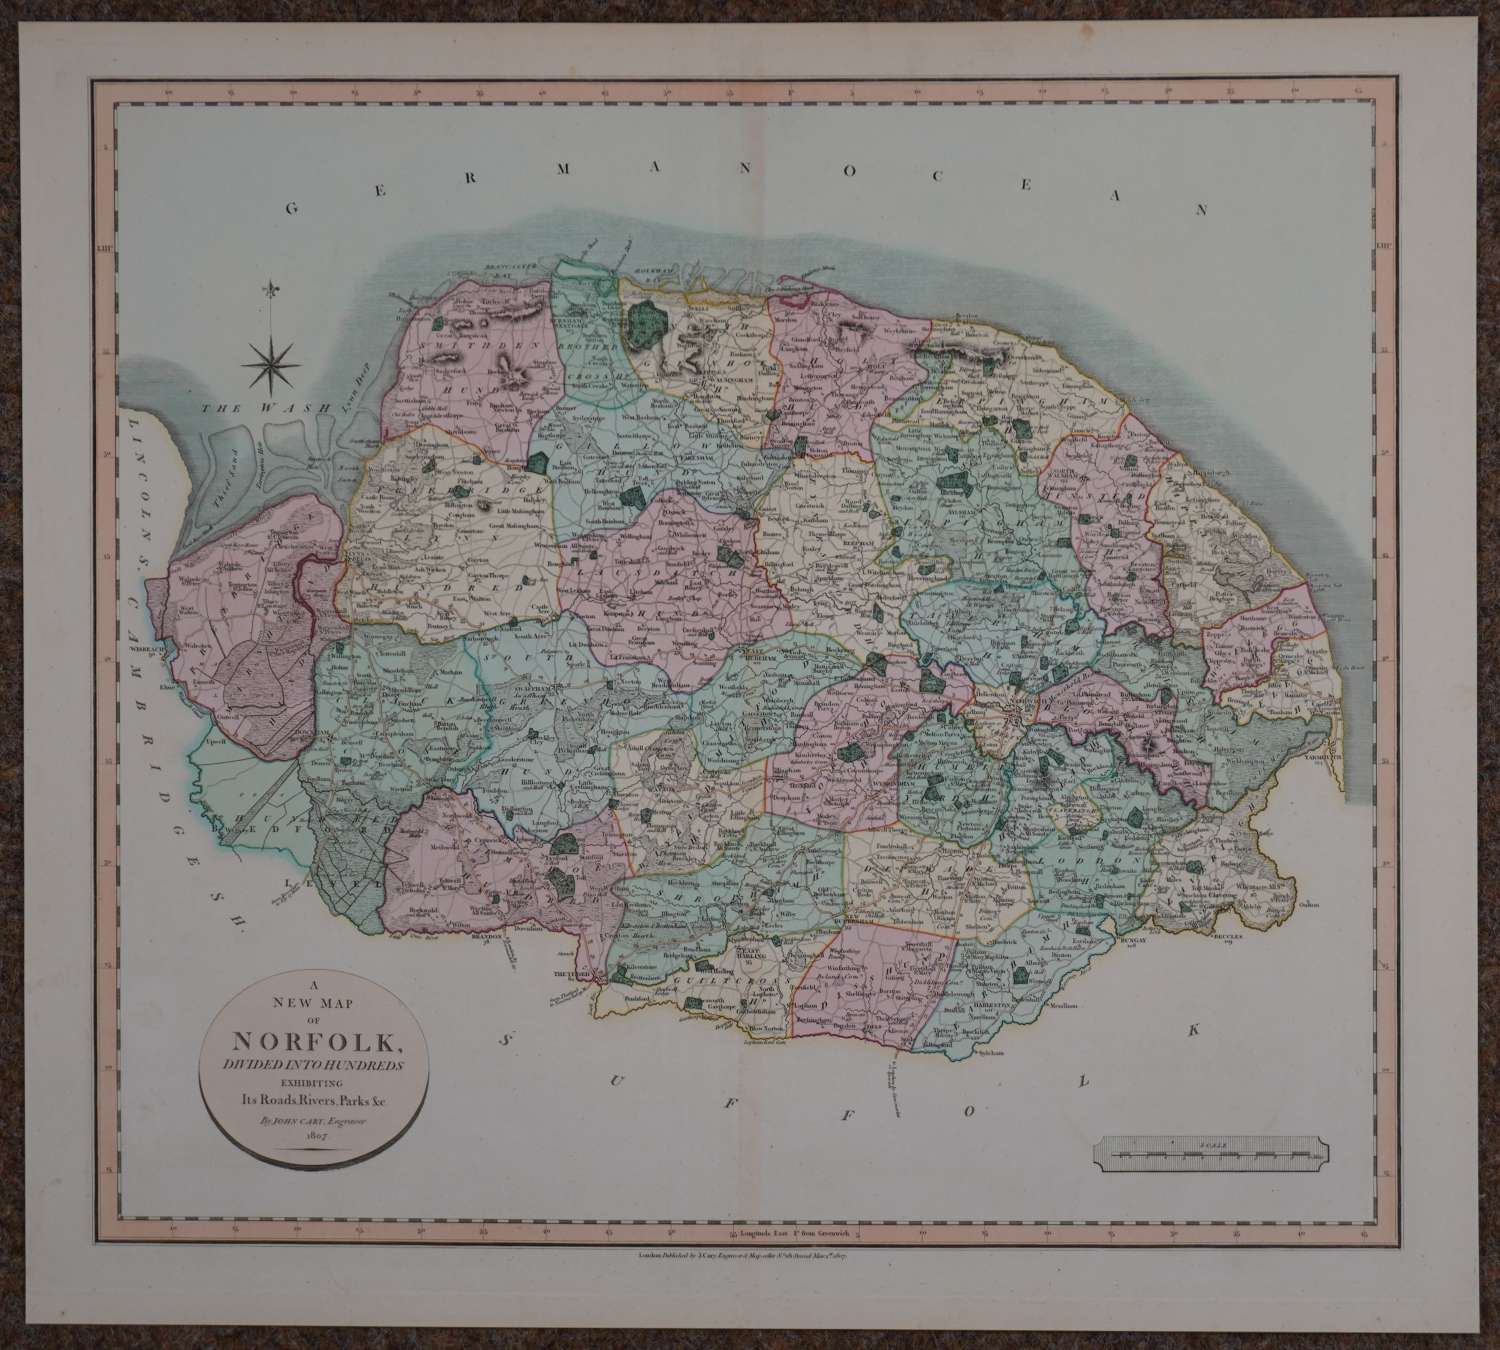 A New Map of Norfolk by John Cary